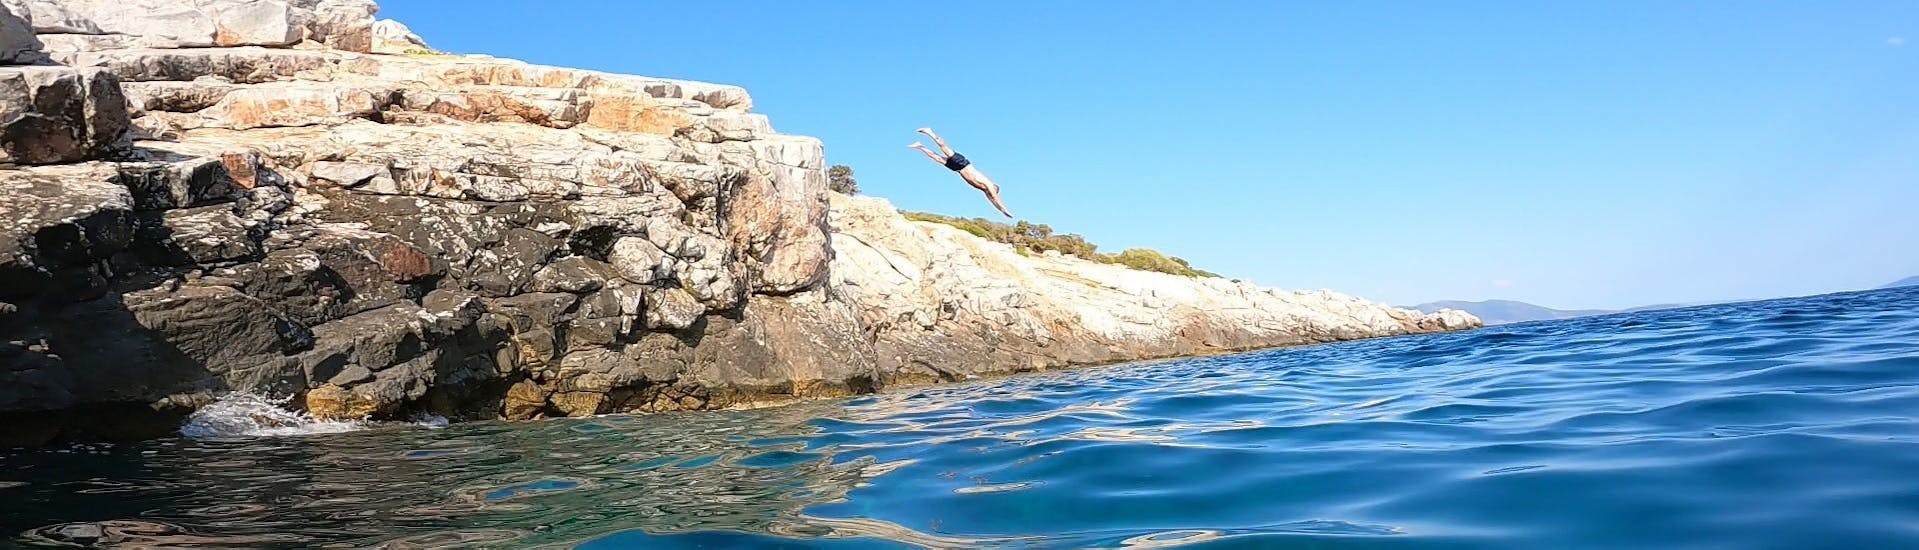 Man diving during the boat tour with snorkeling and cliff jumping near Athens hosted by Kanelakis Diving Experiences - Dimitris Kanelakis.